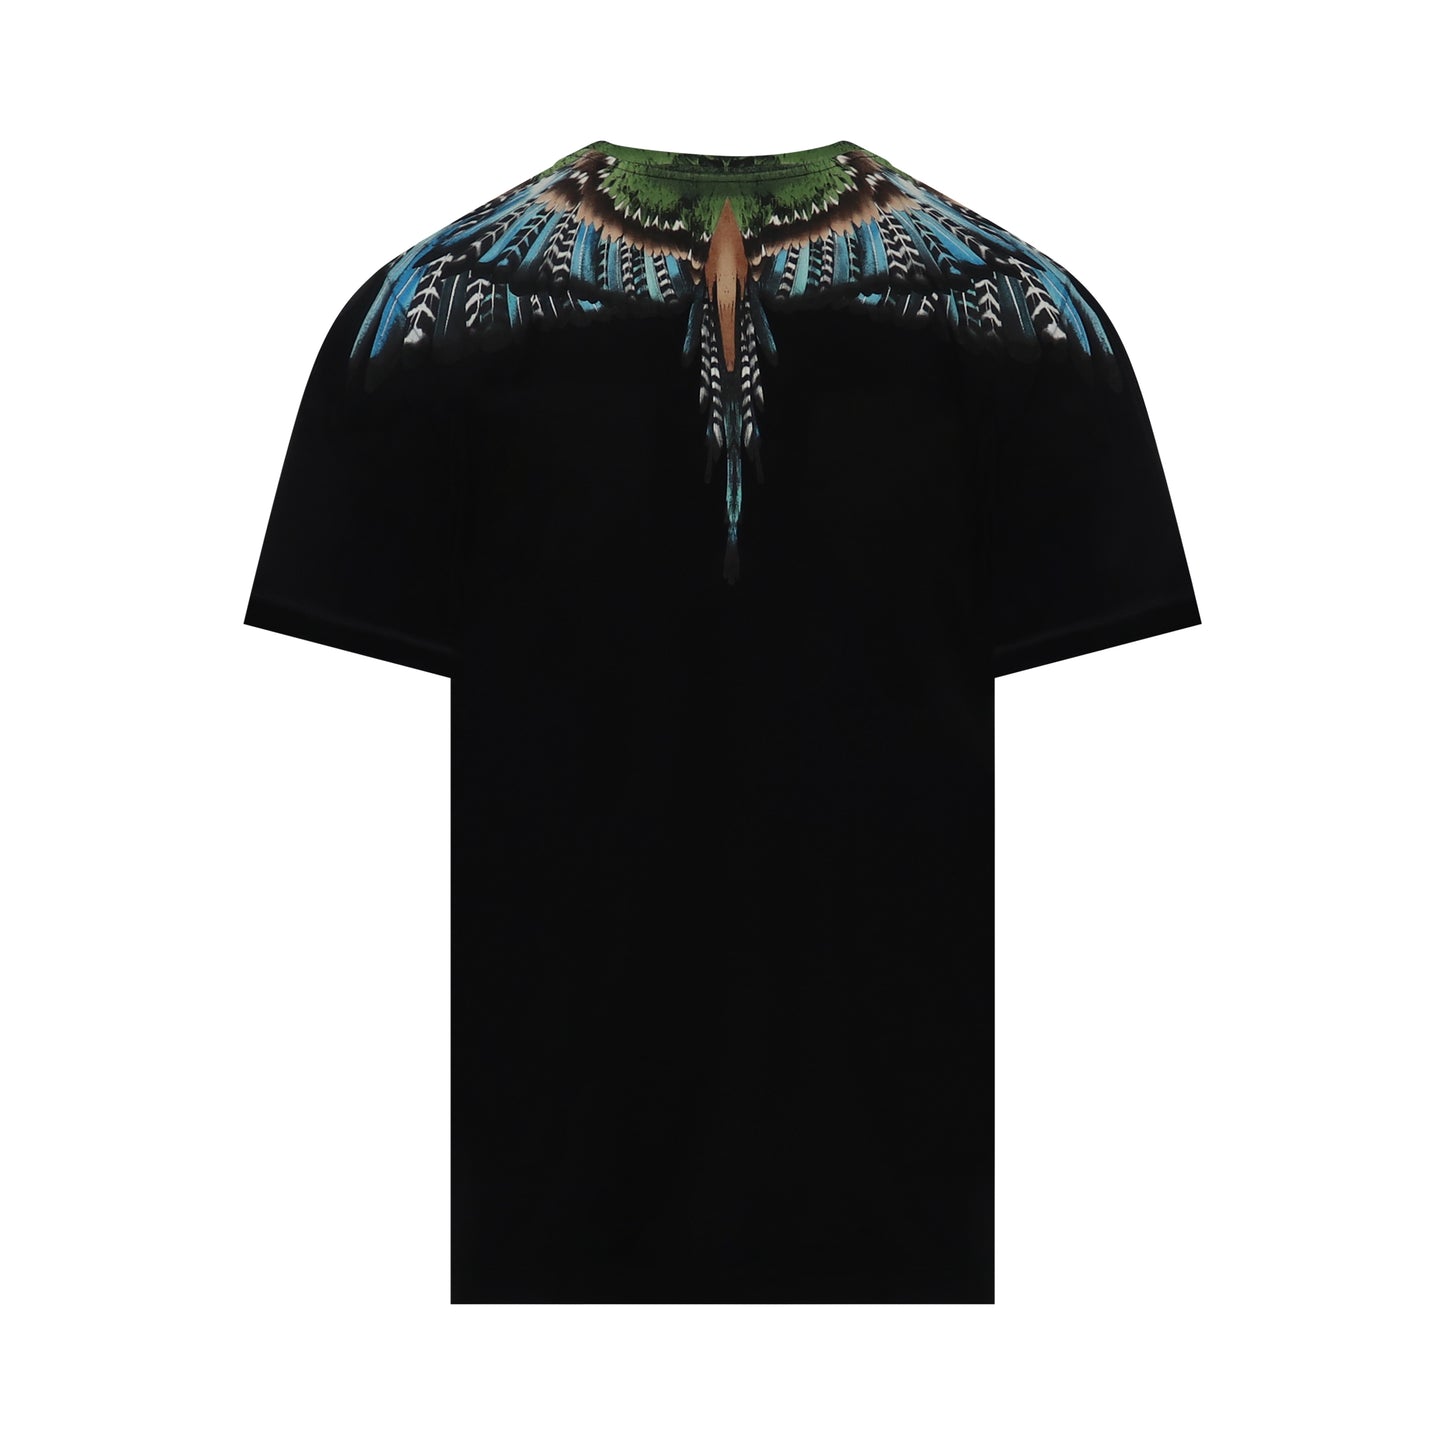 Grizzly Wings Print T-Shirt in Black